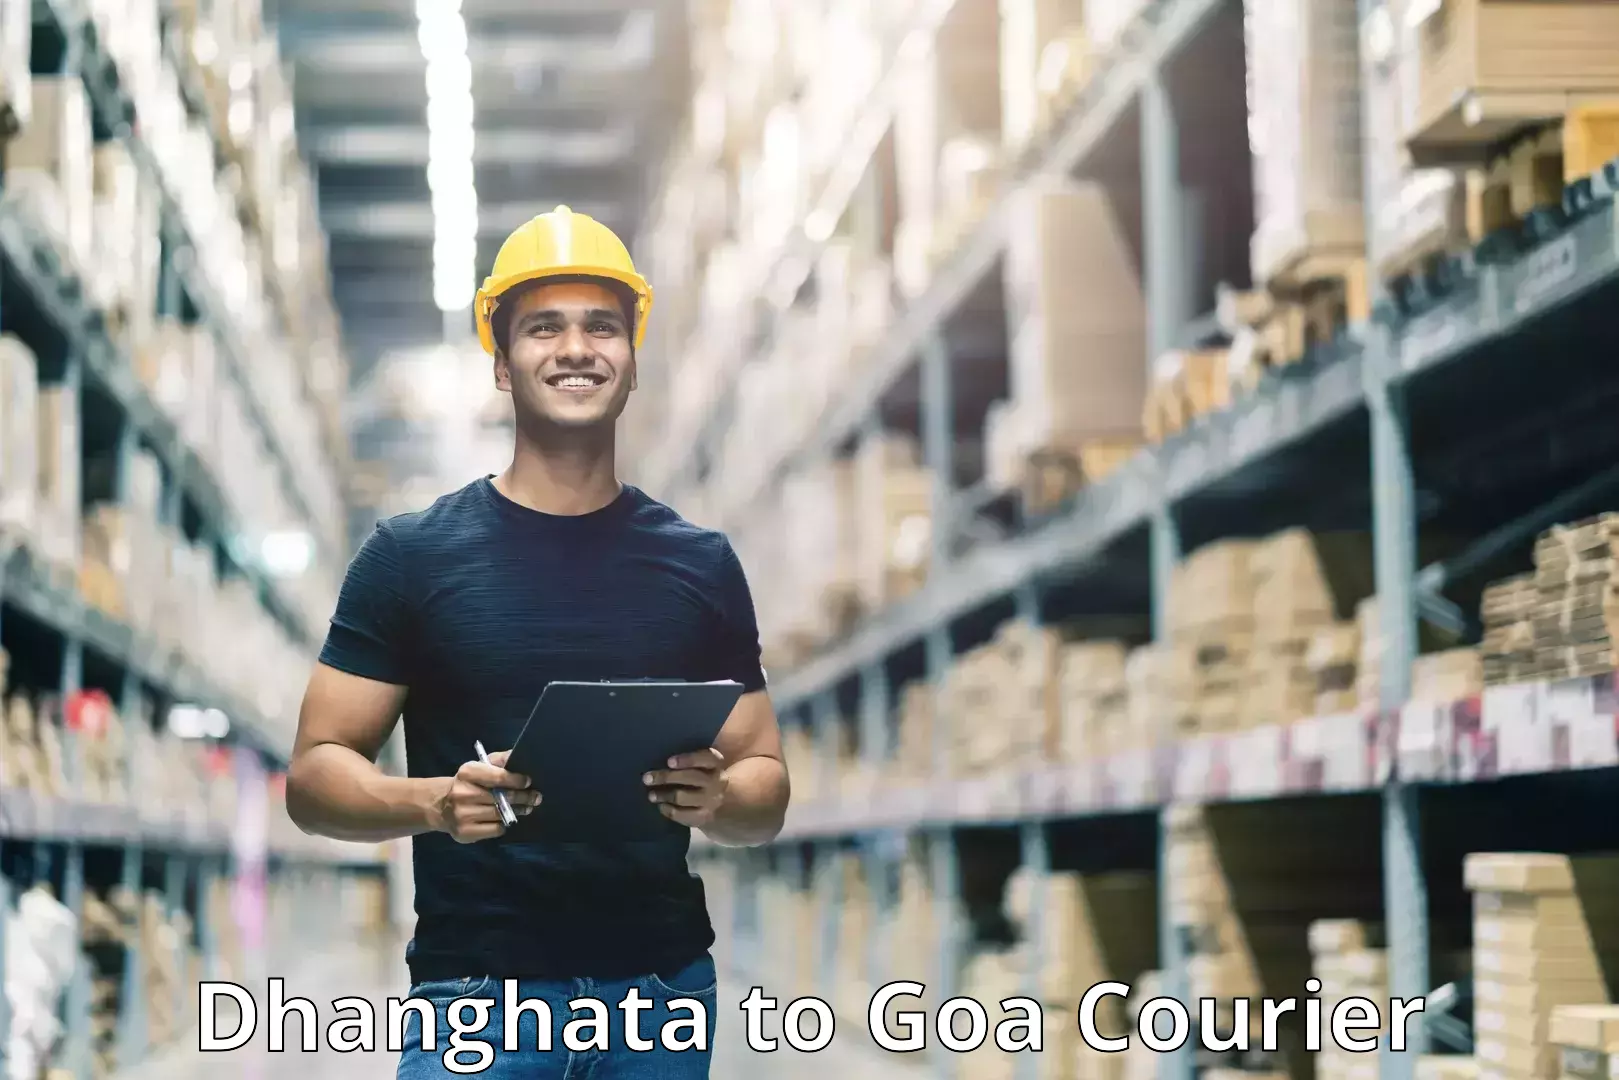 Courier service innovation Dhanghata to Goa University